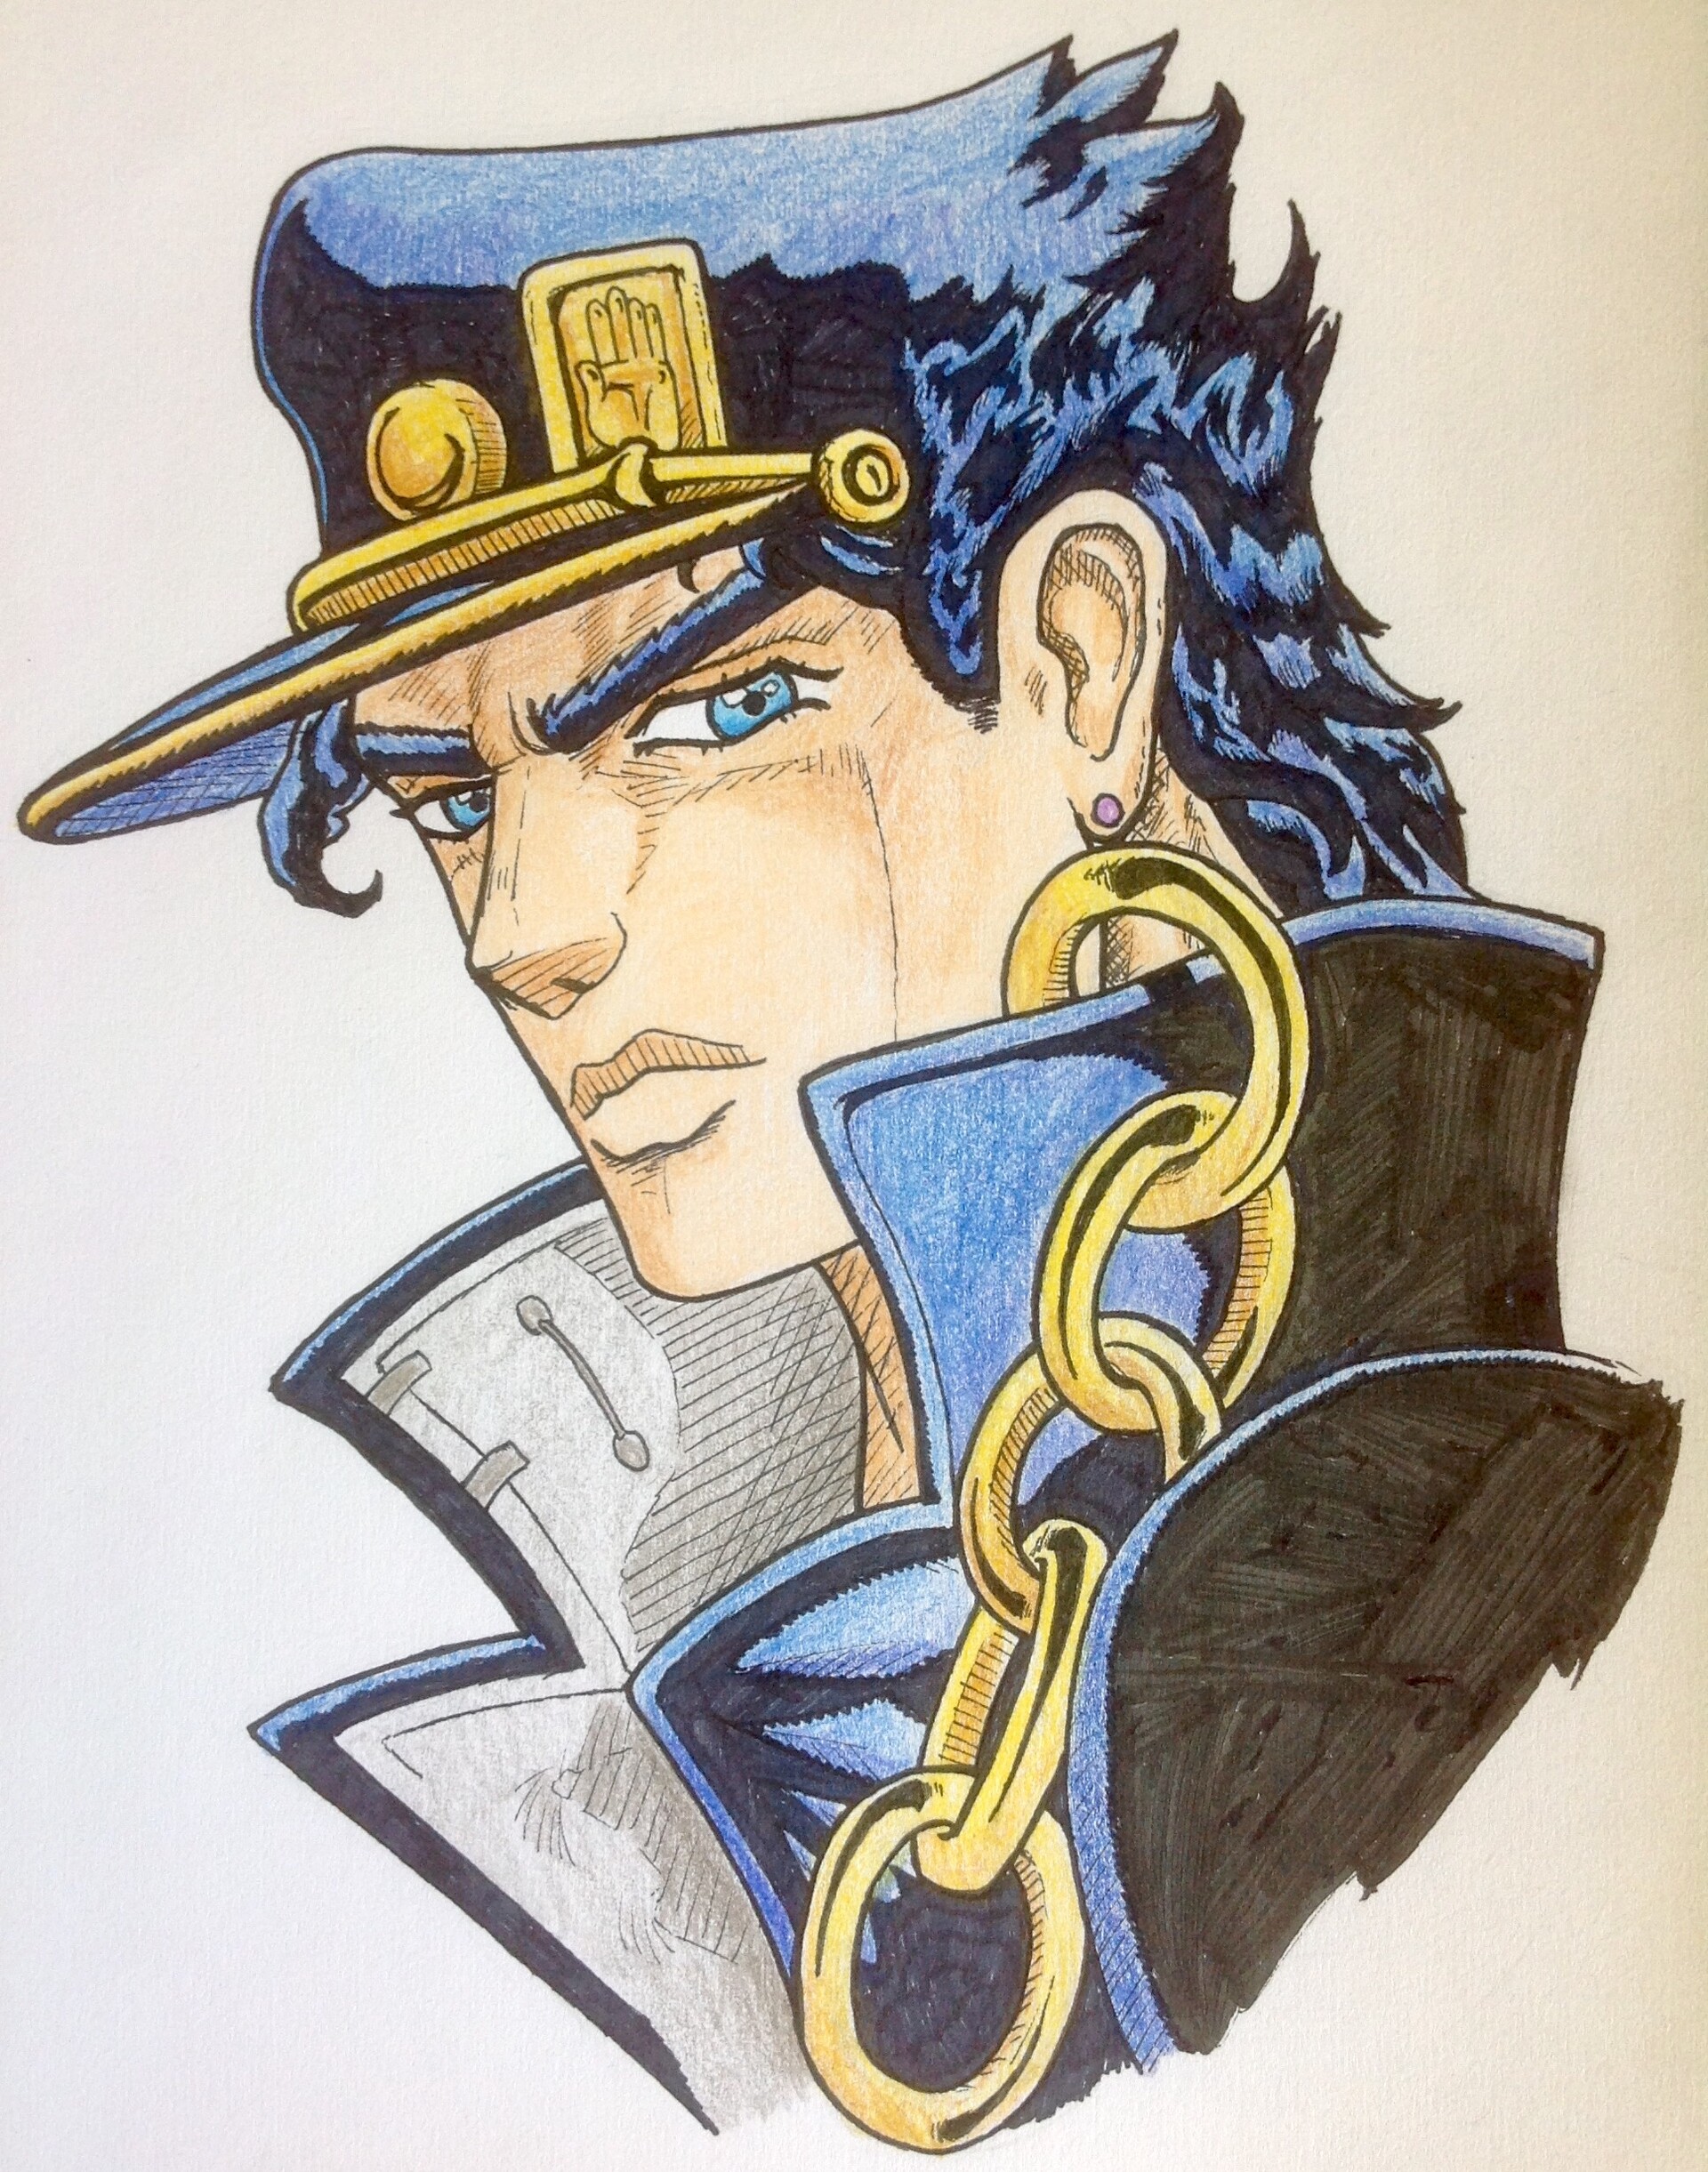 Jotaro a character from anime sketch